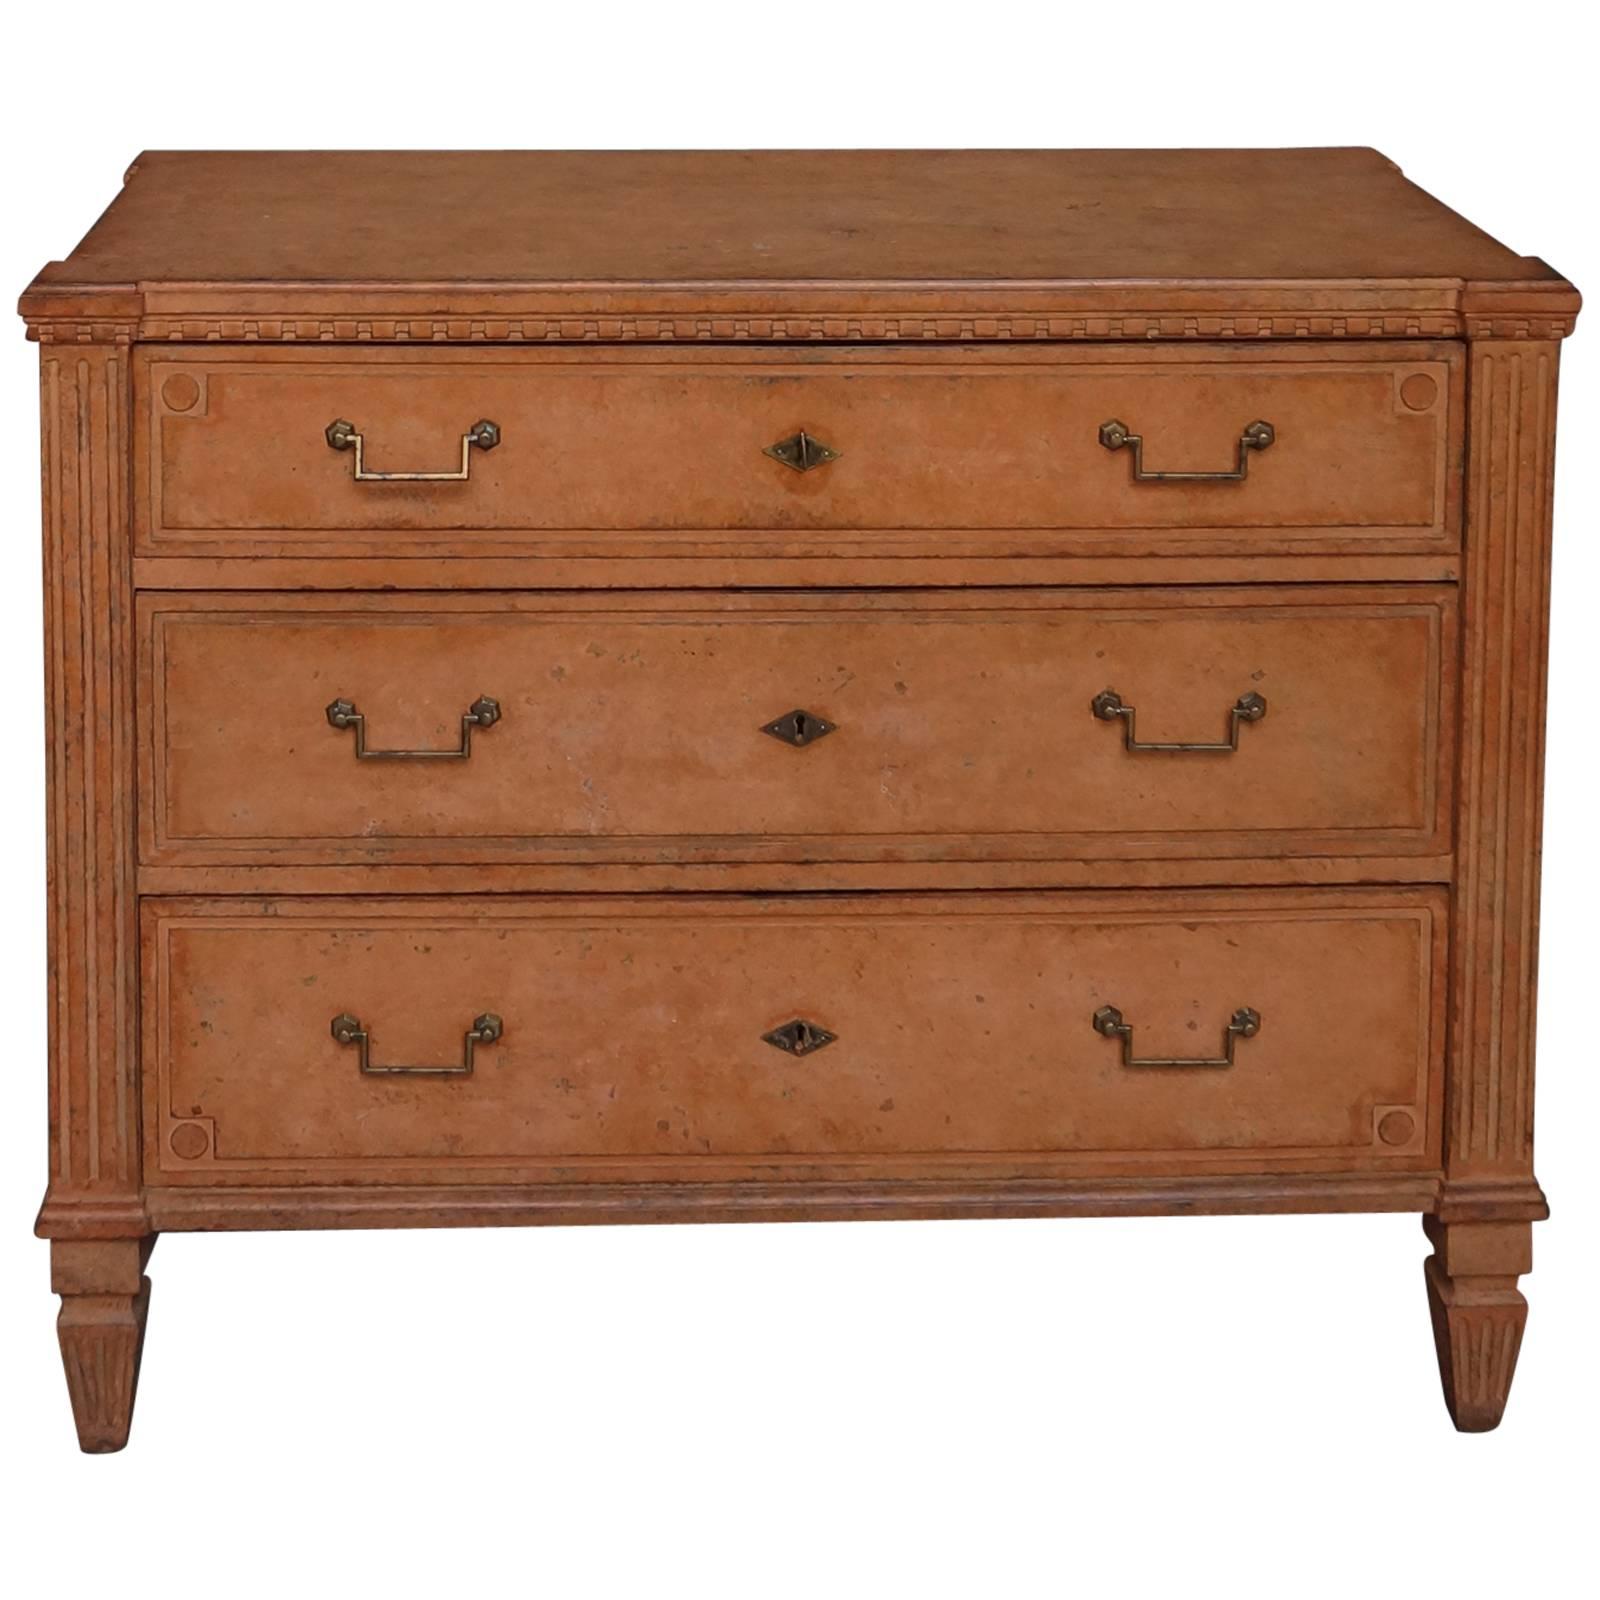 Neoclassical Commode in Salmon Paint